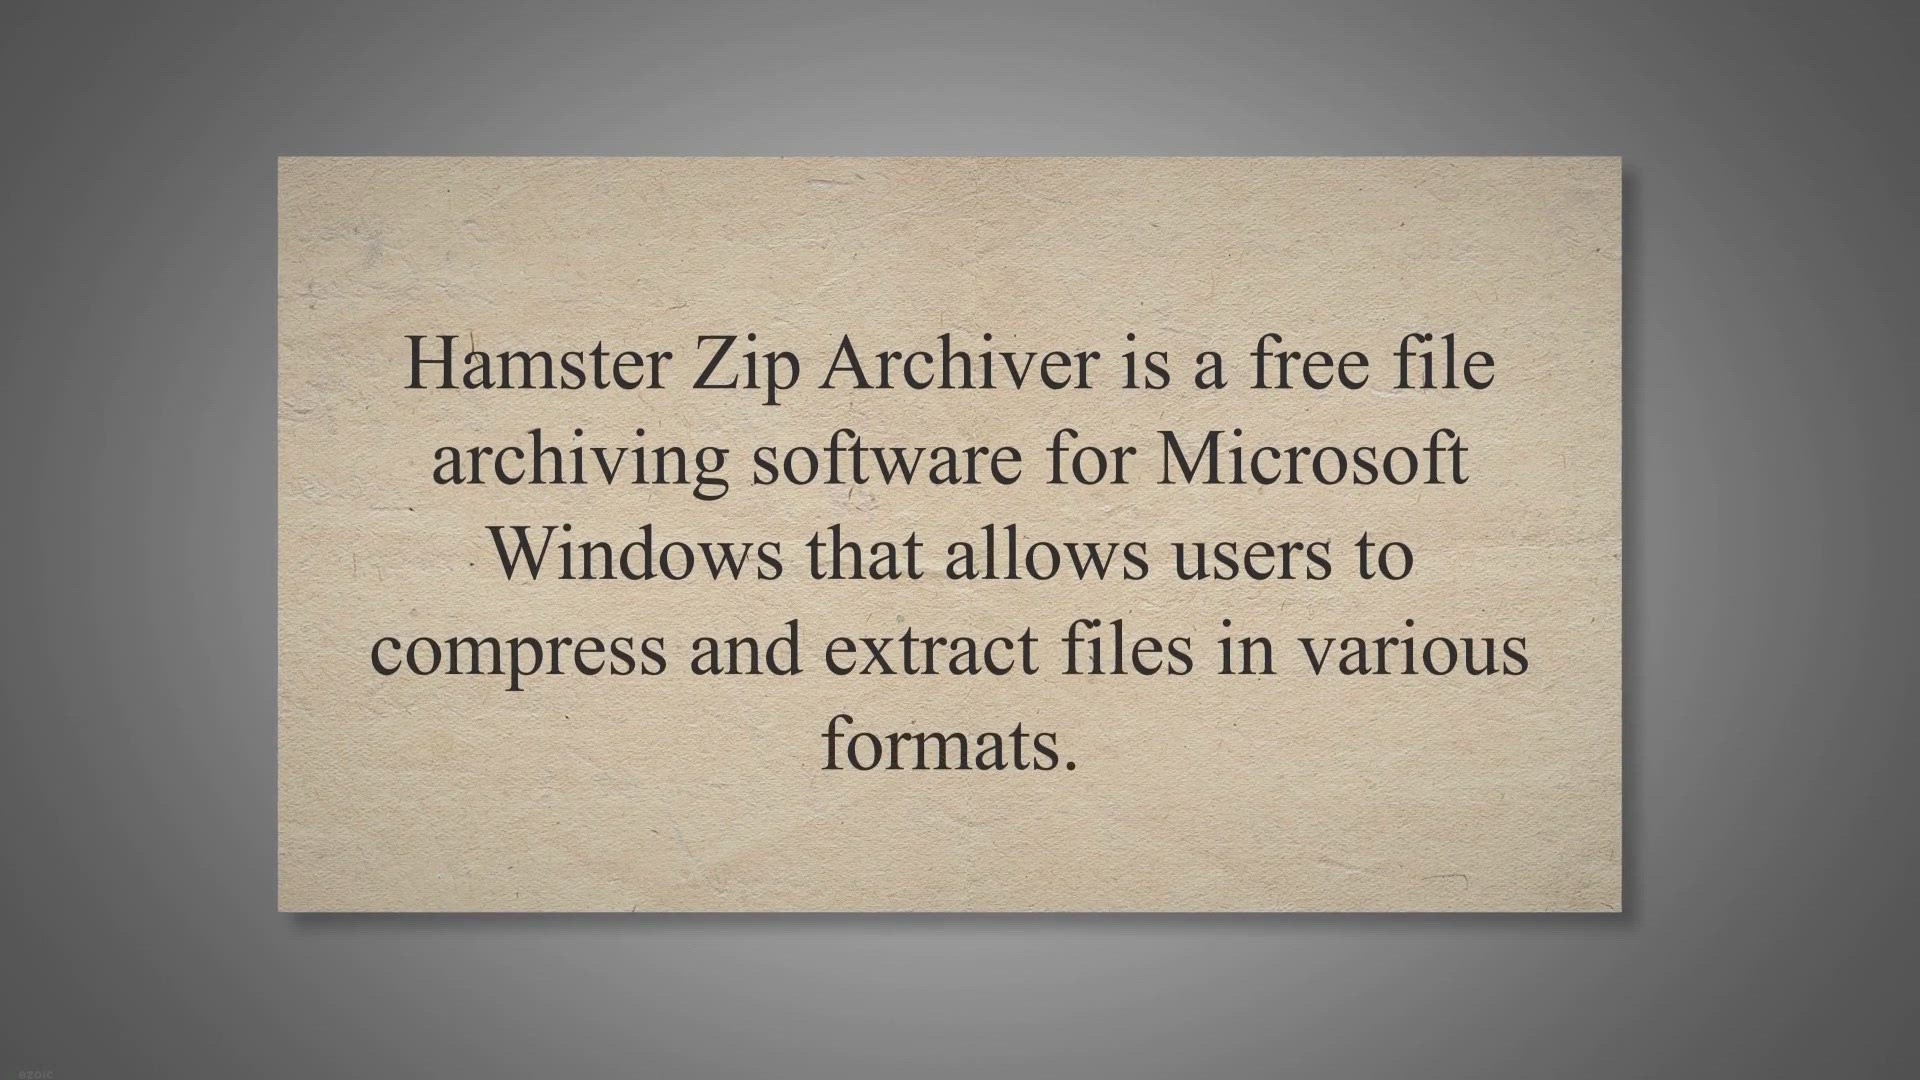 7-Zip — Why The Award-Winning High-Compression File Archiver Has Amassed  400+ Million Downloads by Home Users and Businesses